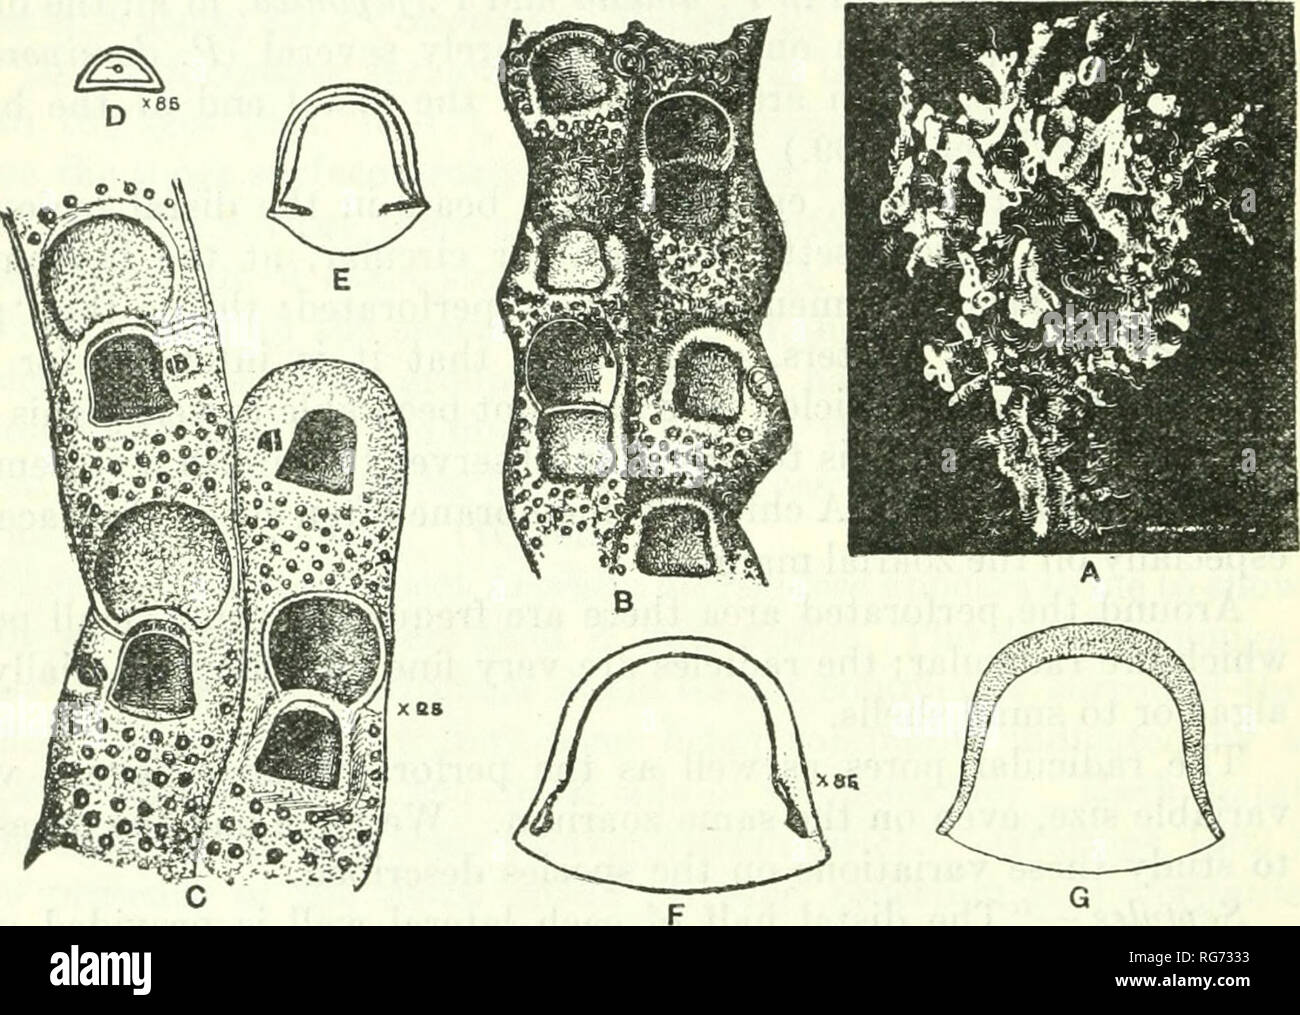 . Bulletin - United States National Museum. Science. 254 BULLETIN 100, UNITED STATES NATIONAL MUSEUM PETRALIA JAPONICA Busk, 1884 Plate 23, figs. 1-3 1909. Lepralia japonica Waters, Bryozoa of the Sudanese Red Sea, Linnean Society Journal, Zoology, vol. 31, p. 149, pi. 13, figs. 10-12. (Bibli- ography, geographic distribution.) 1921. Petralia japonica Marcus, Bryozoen, Results of Swedish scientific expeditions to Australia, Kungl. svenska Vetenskaps-Akademiens Handlinger, vol. 61, No. 5, p. 26, pi. 1, figs. 16, 17; pi. 2, fig. 3. (Bibli- ography.). Fig. 104.—Genus Petralia Levinsen, 1909 A-G.  Stock Photo